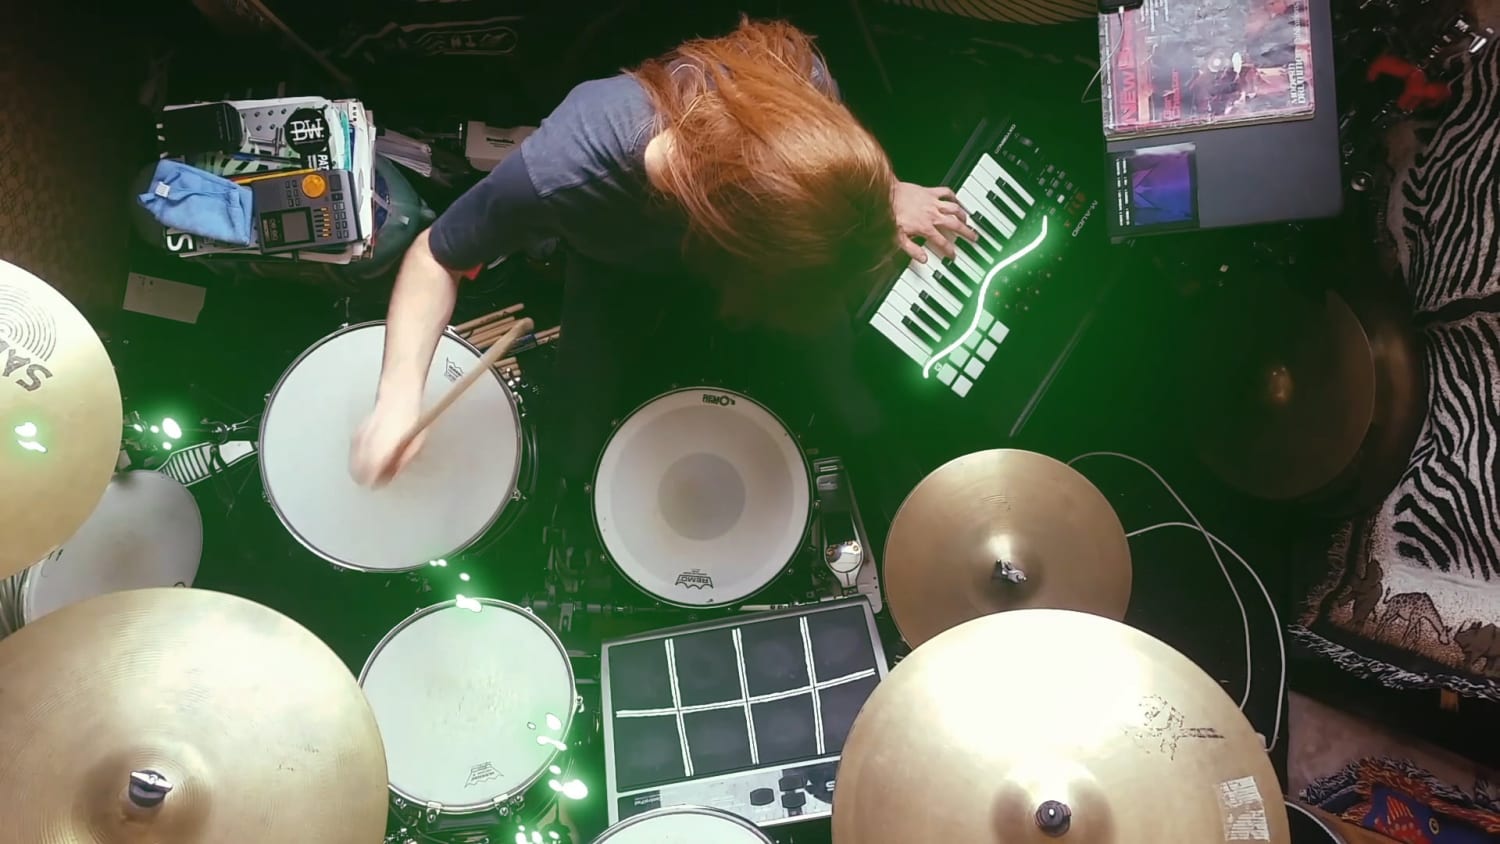 This drummer spent quarantine learning actual sorcery